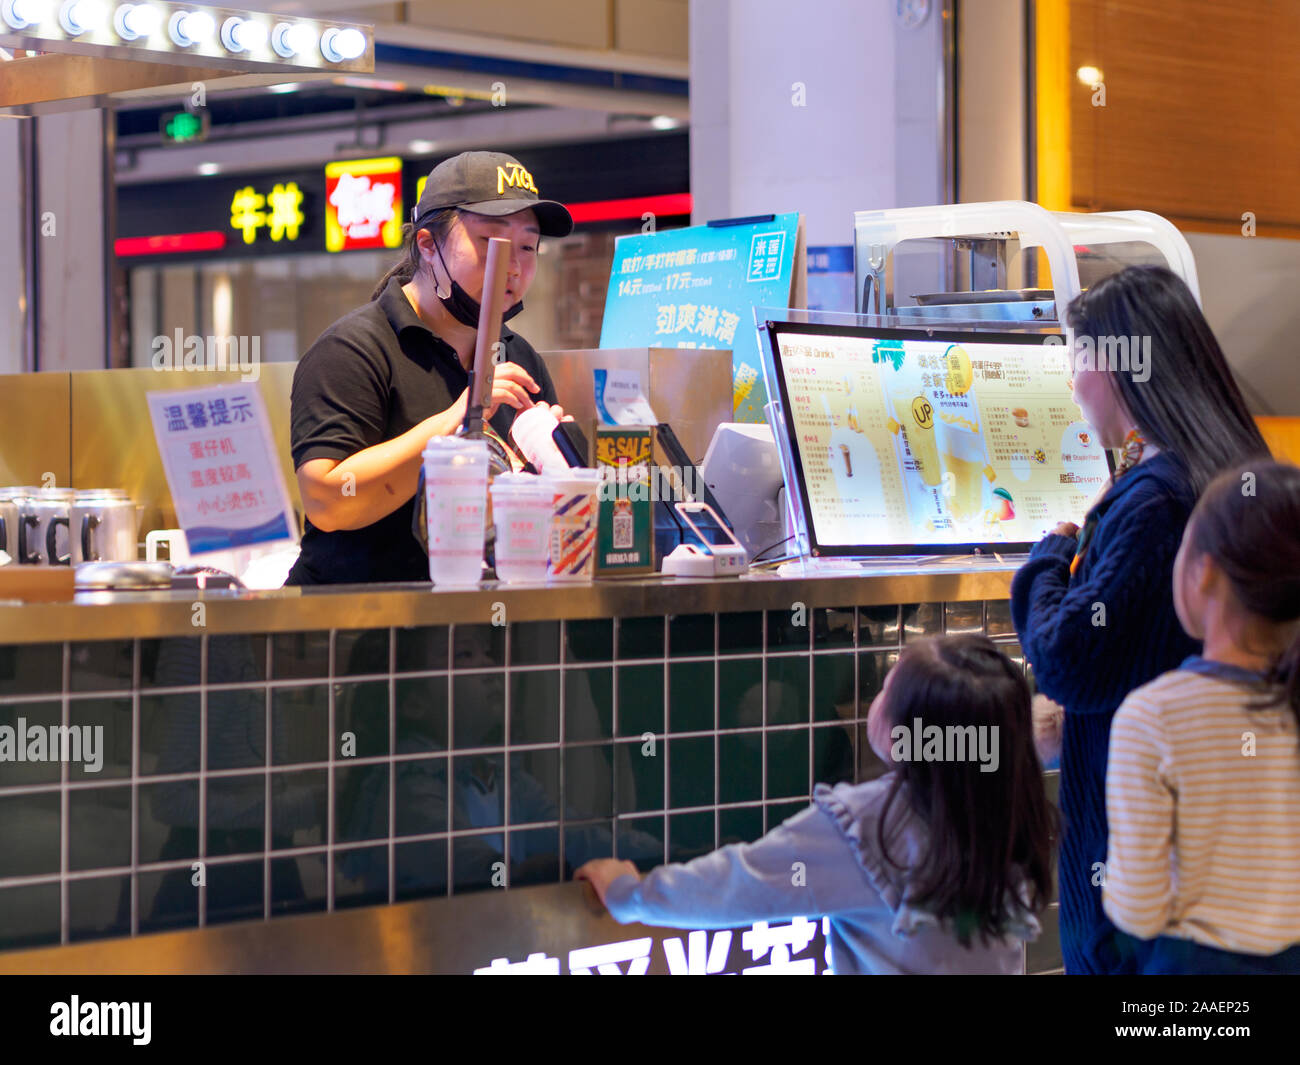 TIANJIN, CHINA - 7 OCT 2019 - A mother of two young children orders drinks from a bubble tea stall within a shopping mall. Food & beverage / consumer Stock Photo